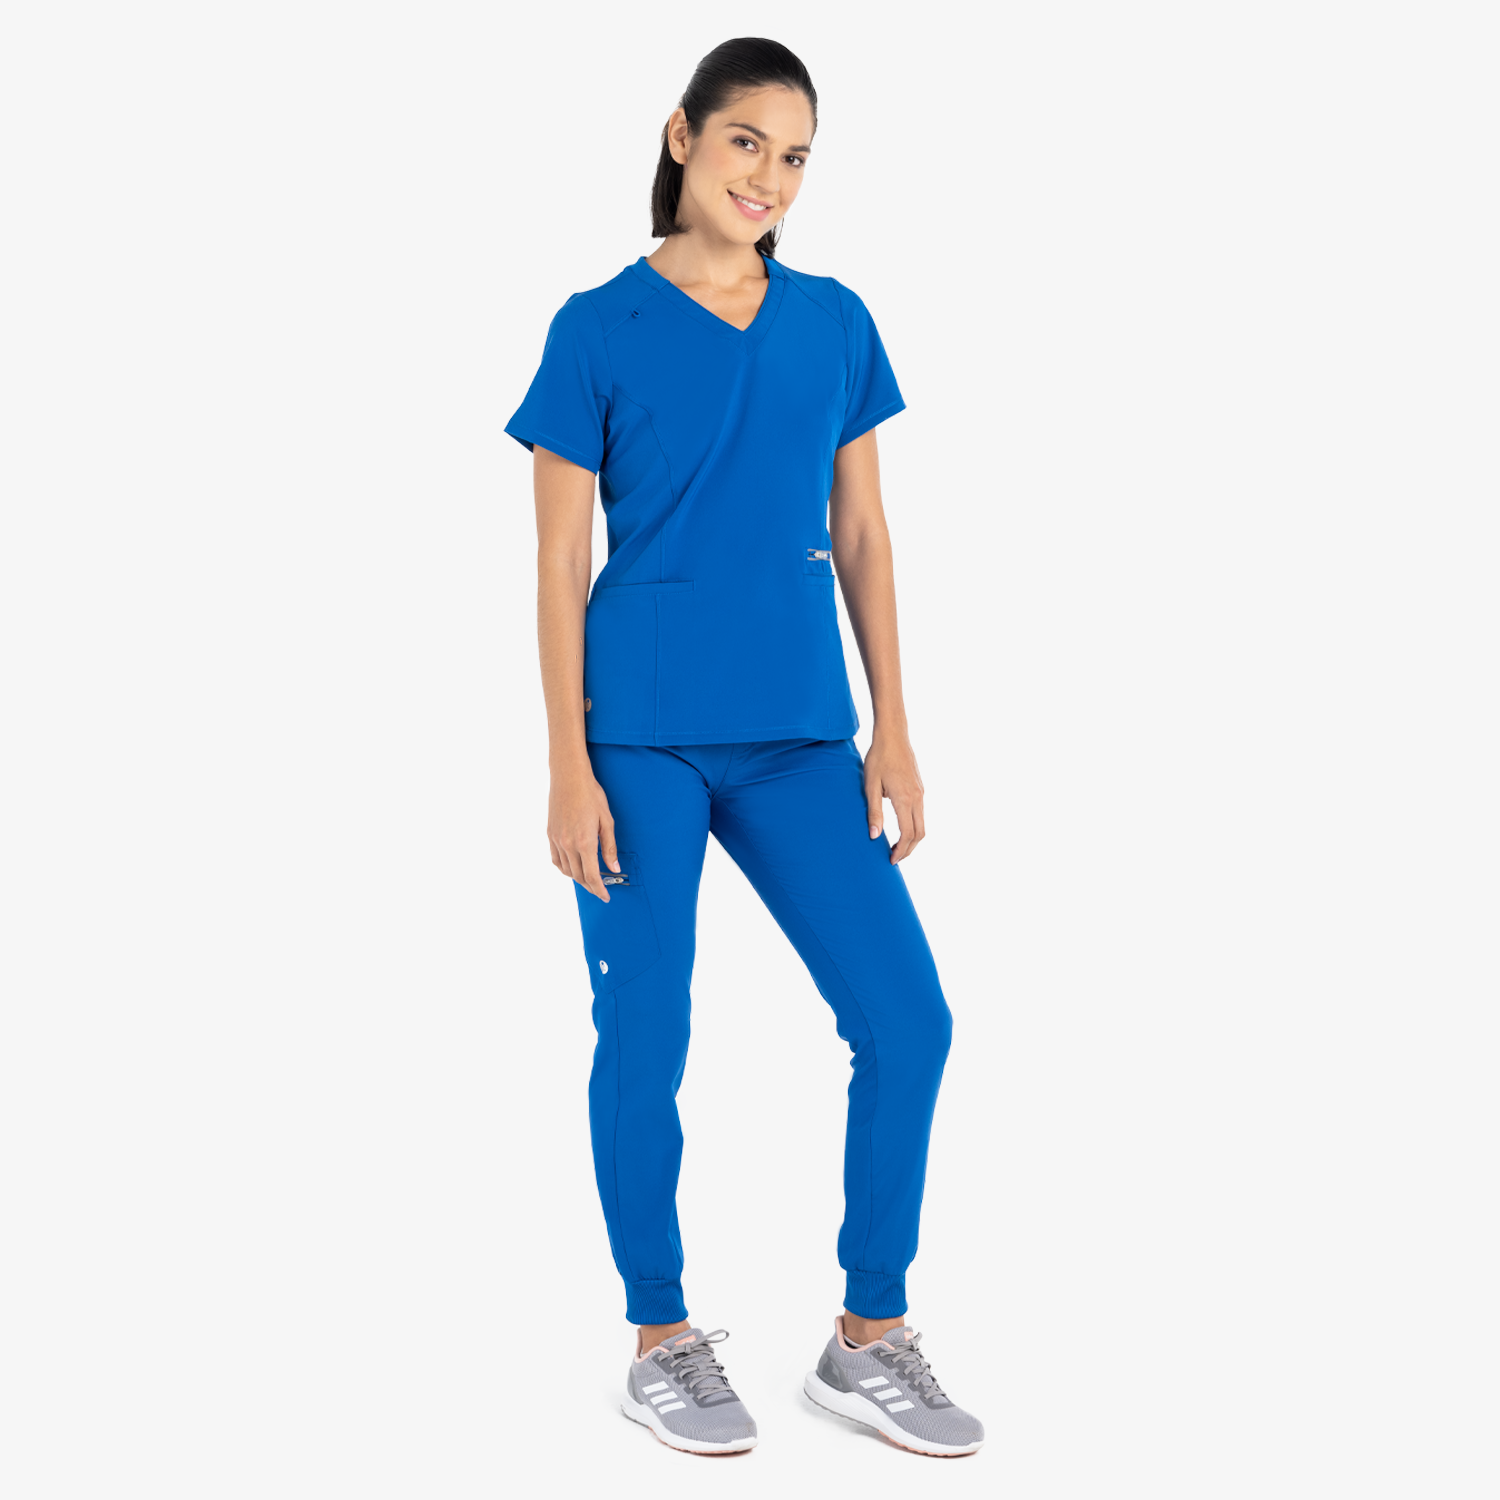 LIMITED EDITION LIFETHREADS WOMEN’S ACTIVE SCRUB TOP